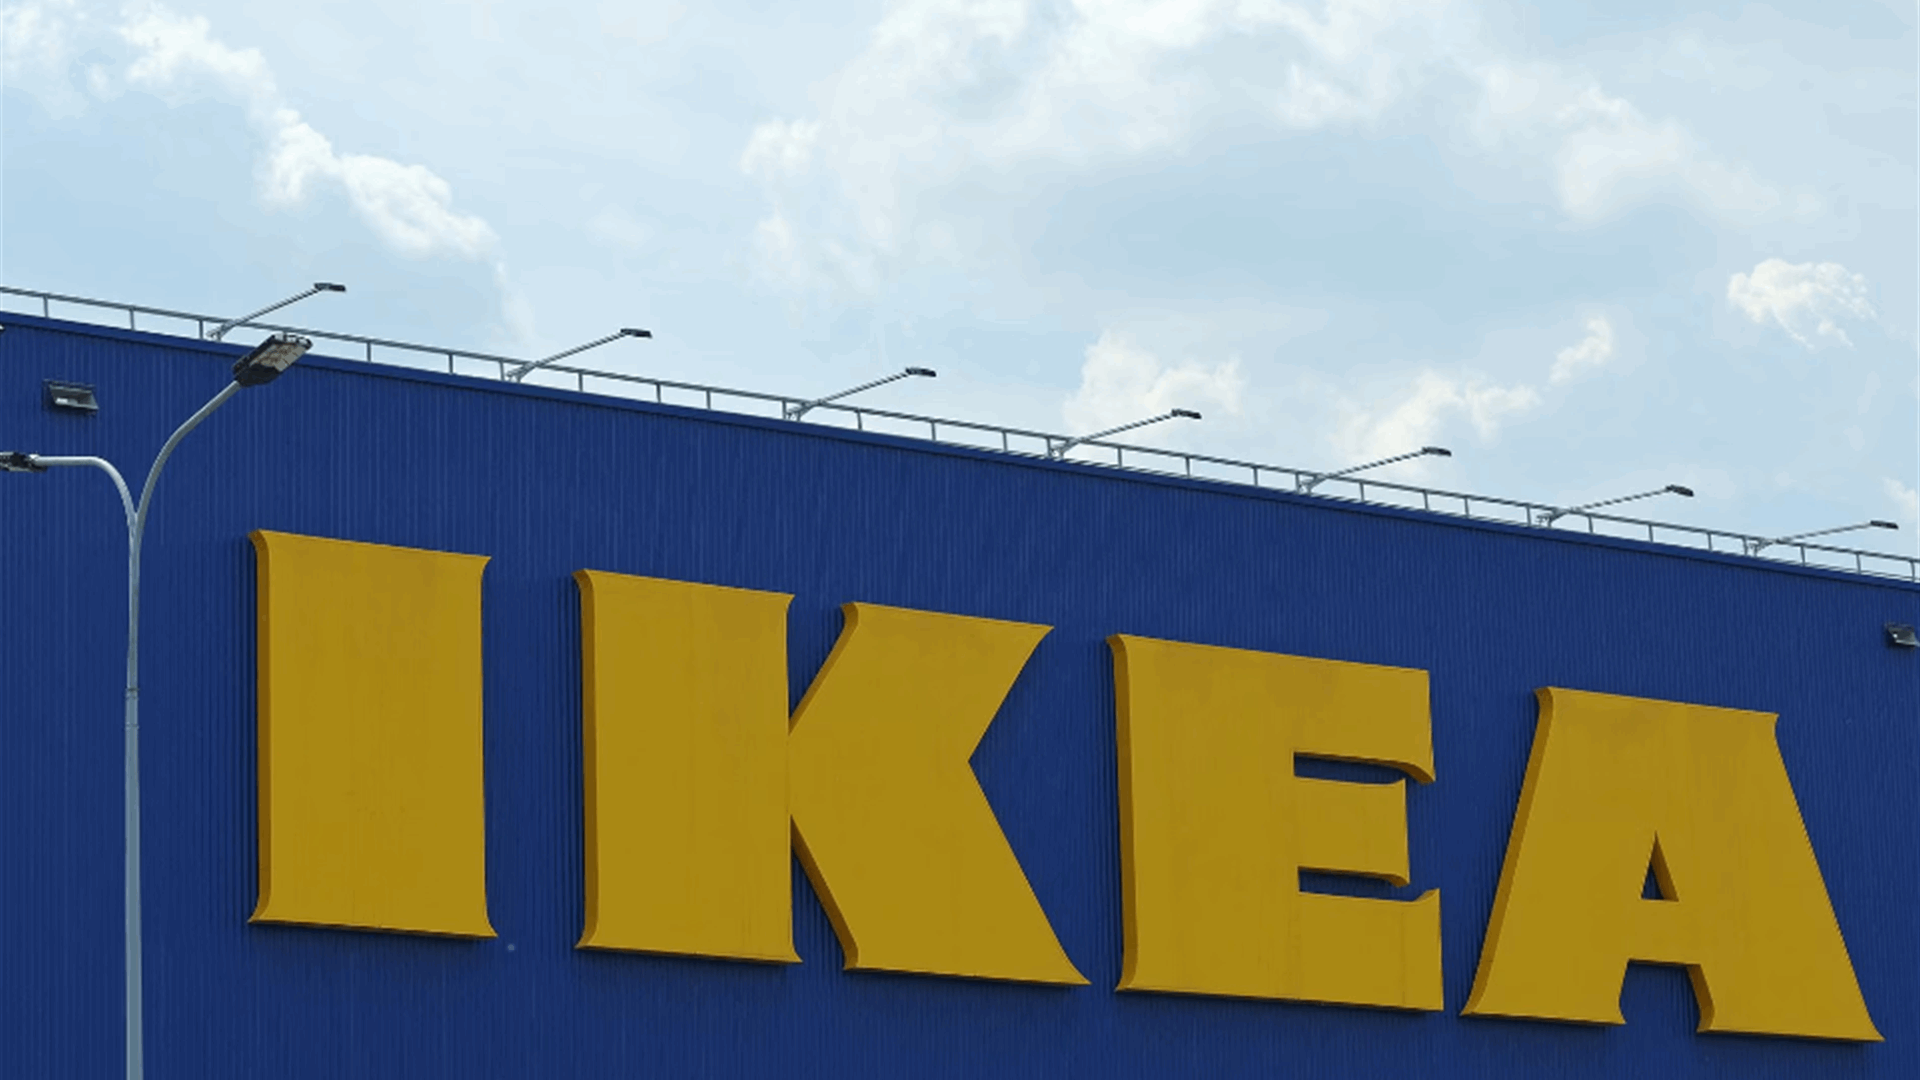 IKEA taps Baltics, others for more wood supplies after shunning Russia